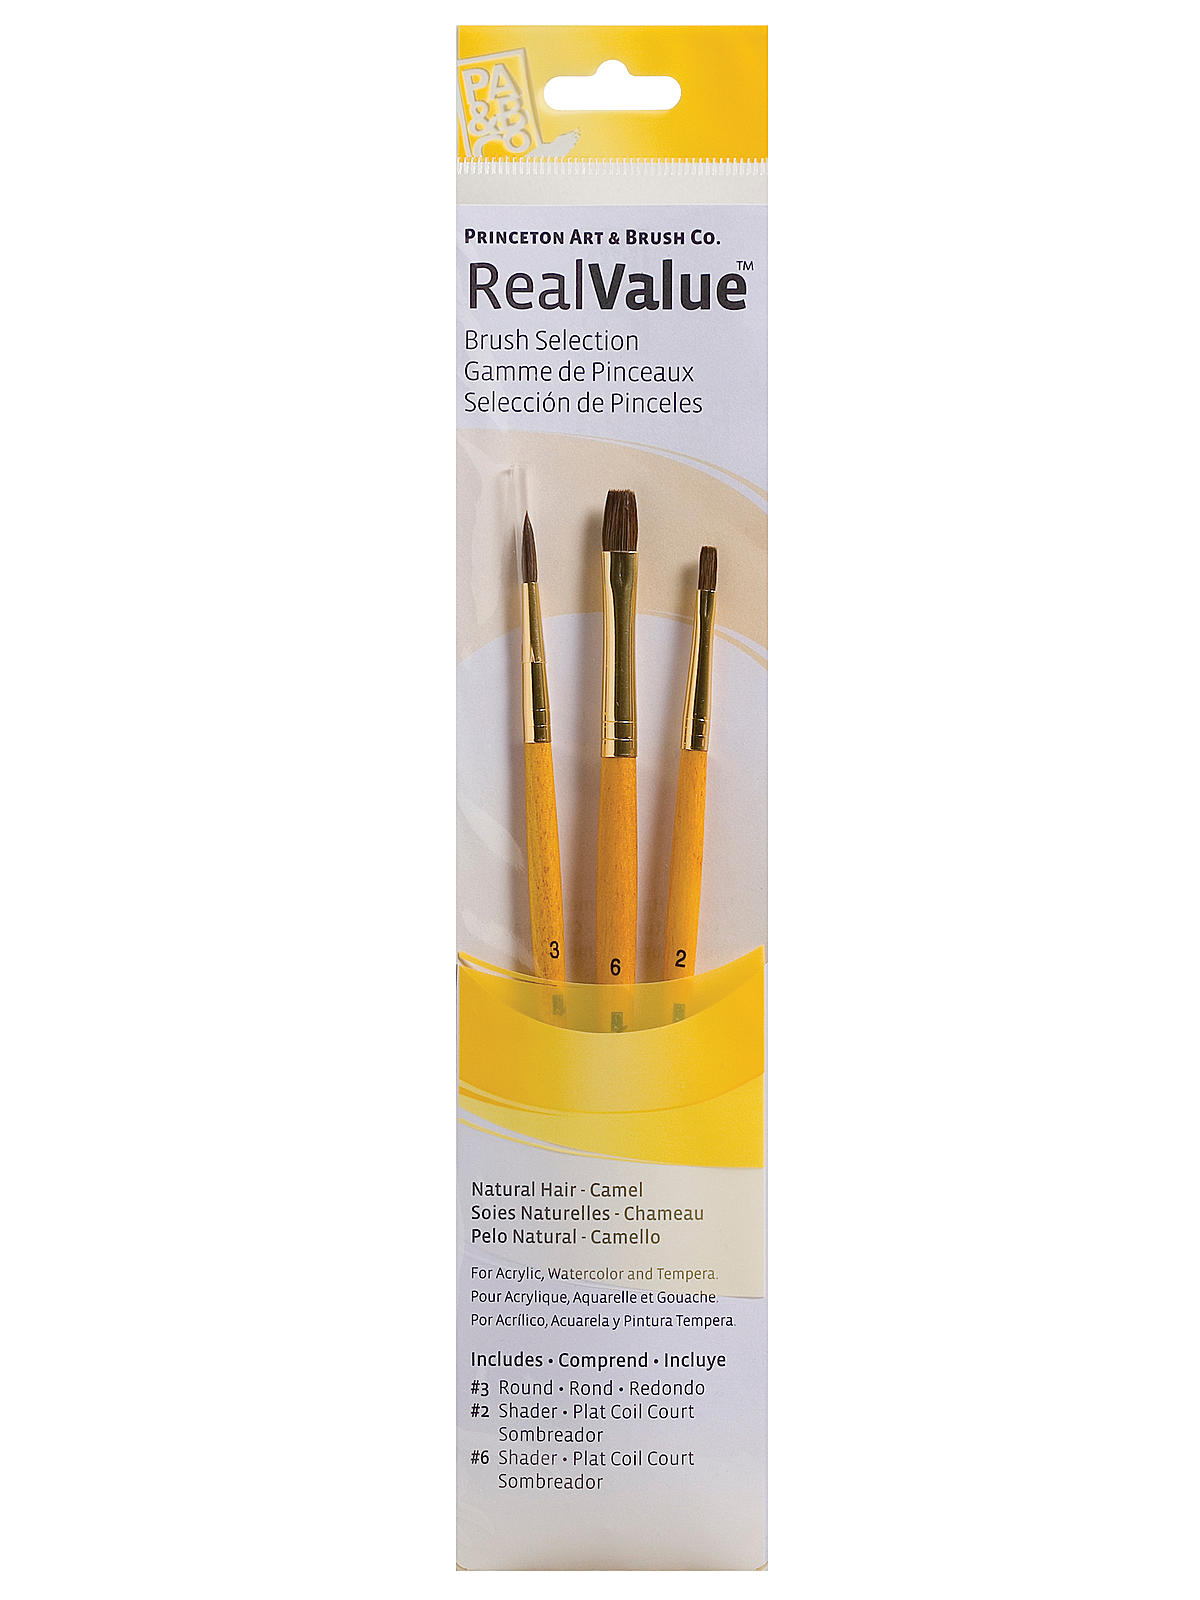 Real Value Series Yellow Handle Brush Sets 9101 set of 3